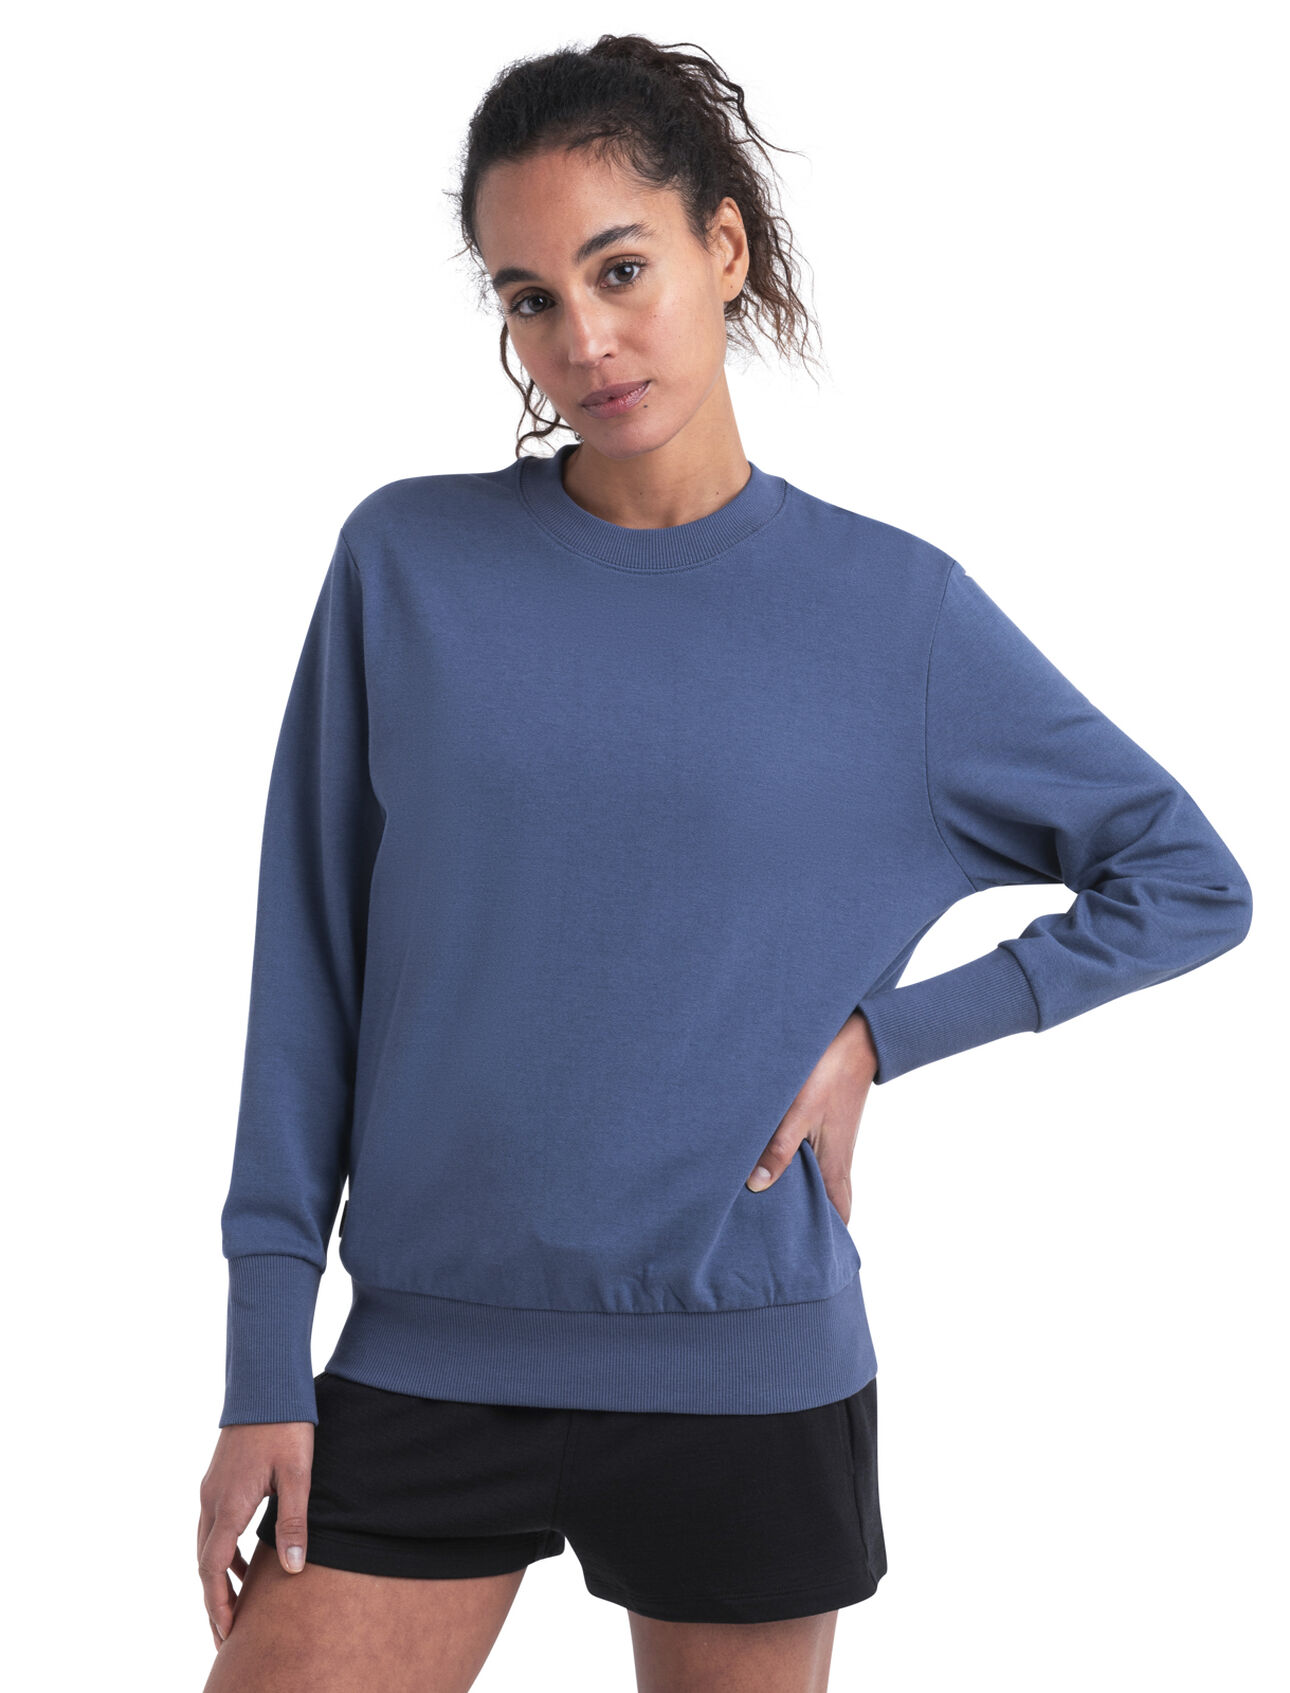 Womens Merino Blend Central II Long Sleeve Sweatshirt A versatile, everyday pullover that goes anywhere in comfort, the Central II Long Sleeve Sweatshirt features a sustainable blend of natural merino wool and soft organically grown cotton.